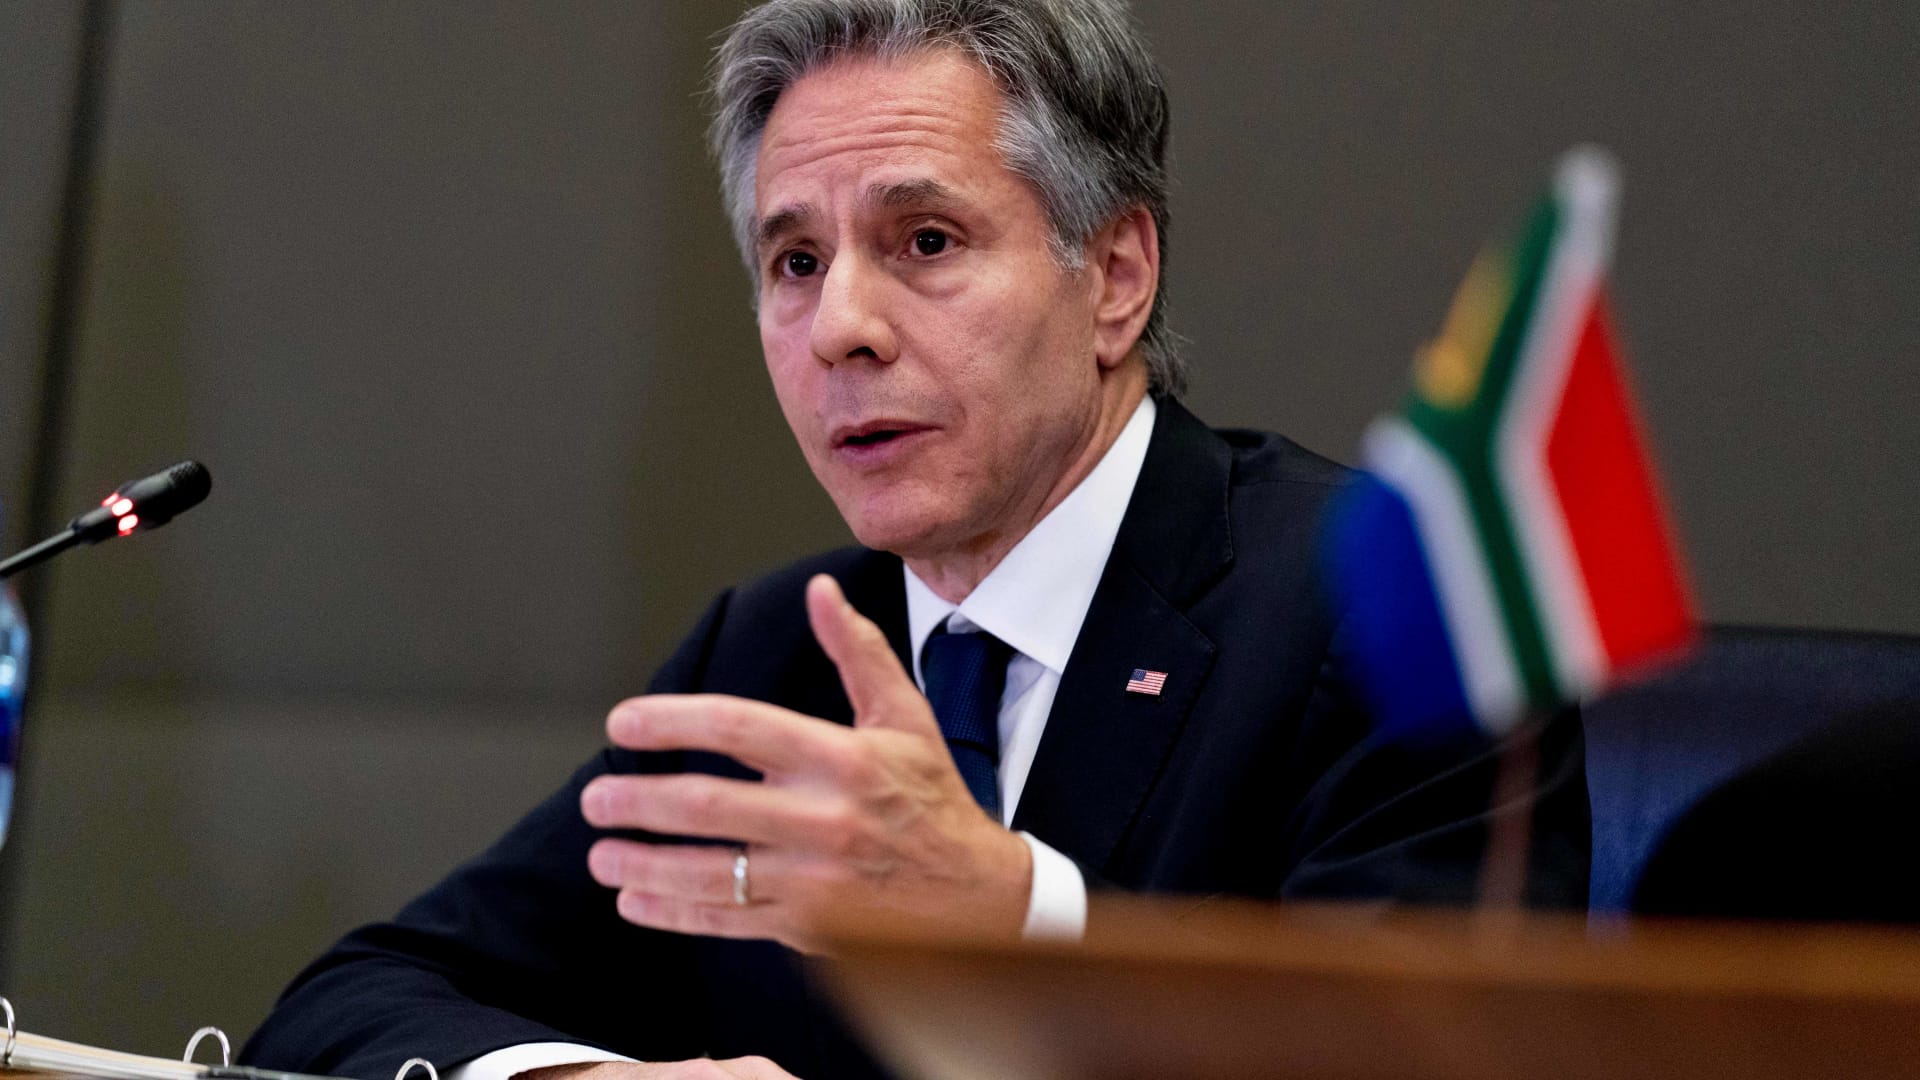 US Secretary of State Antony Blinken speaks to members of the media after meeting visiting the South African Department of International Relations and Cooperation in Pretoria, South Africa, on August 8, 2022.